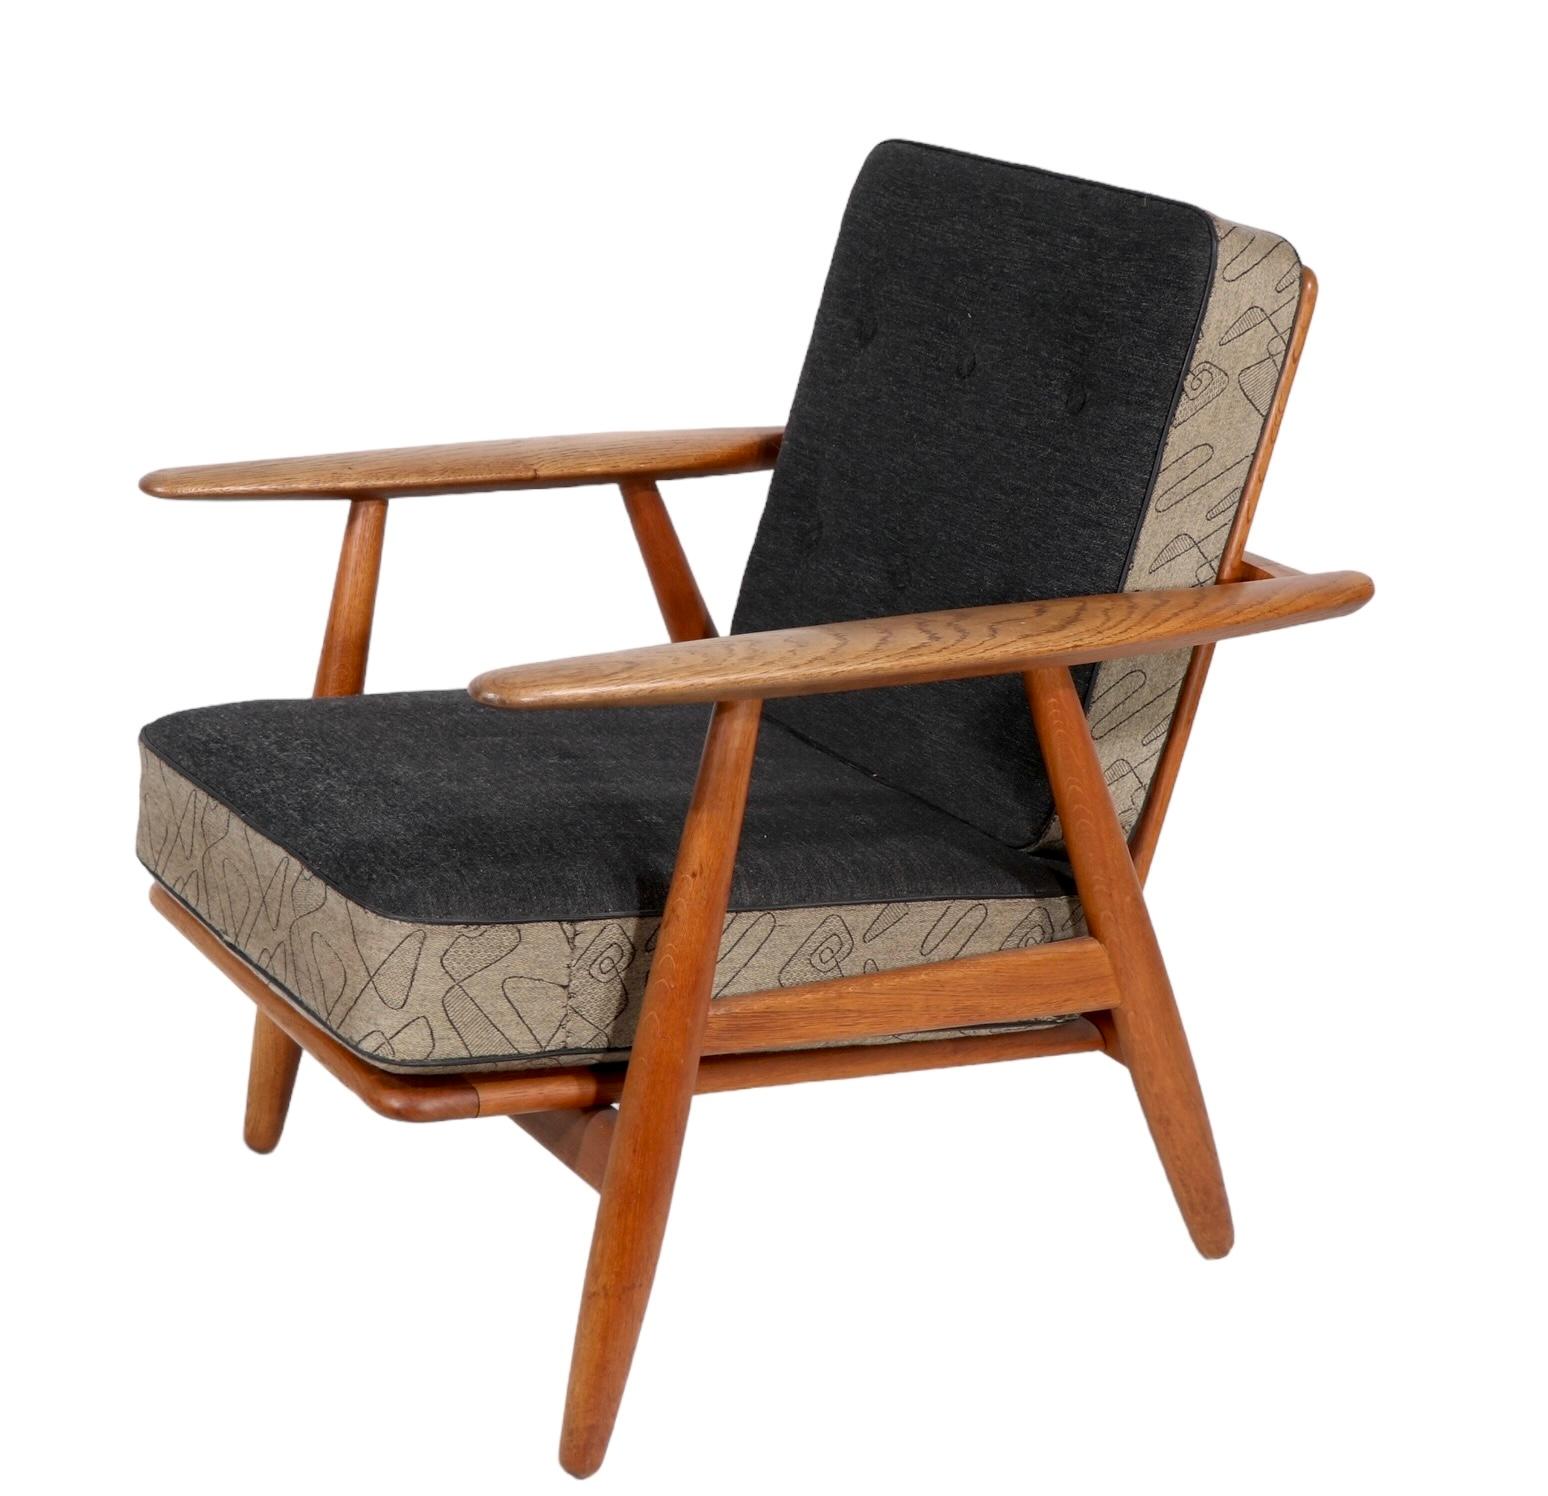 Original Hans Wegner Cigar Chair Made in Denmark for GETAMA c 1950's In Good Condition For Sale In New York, NY